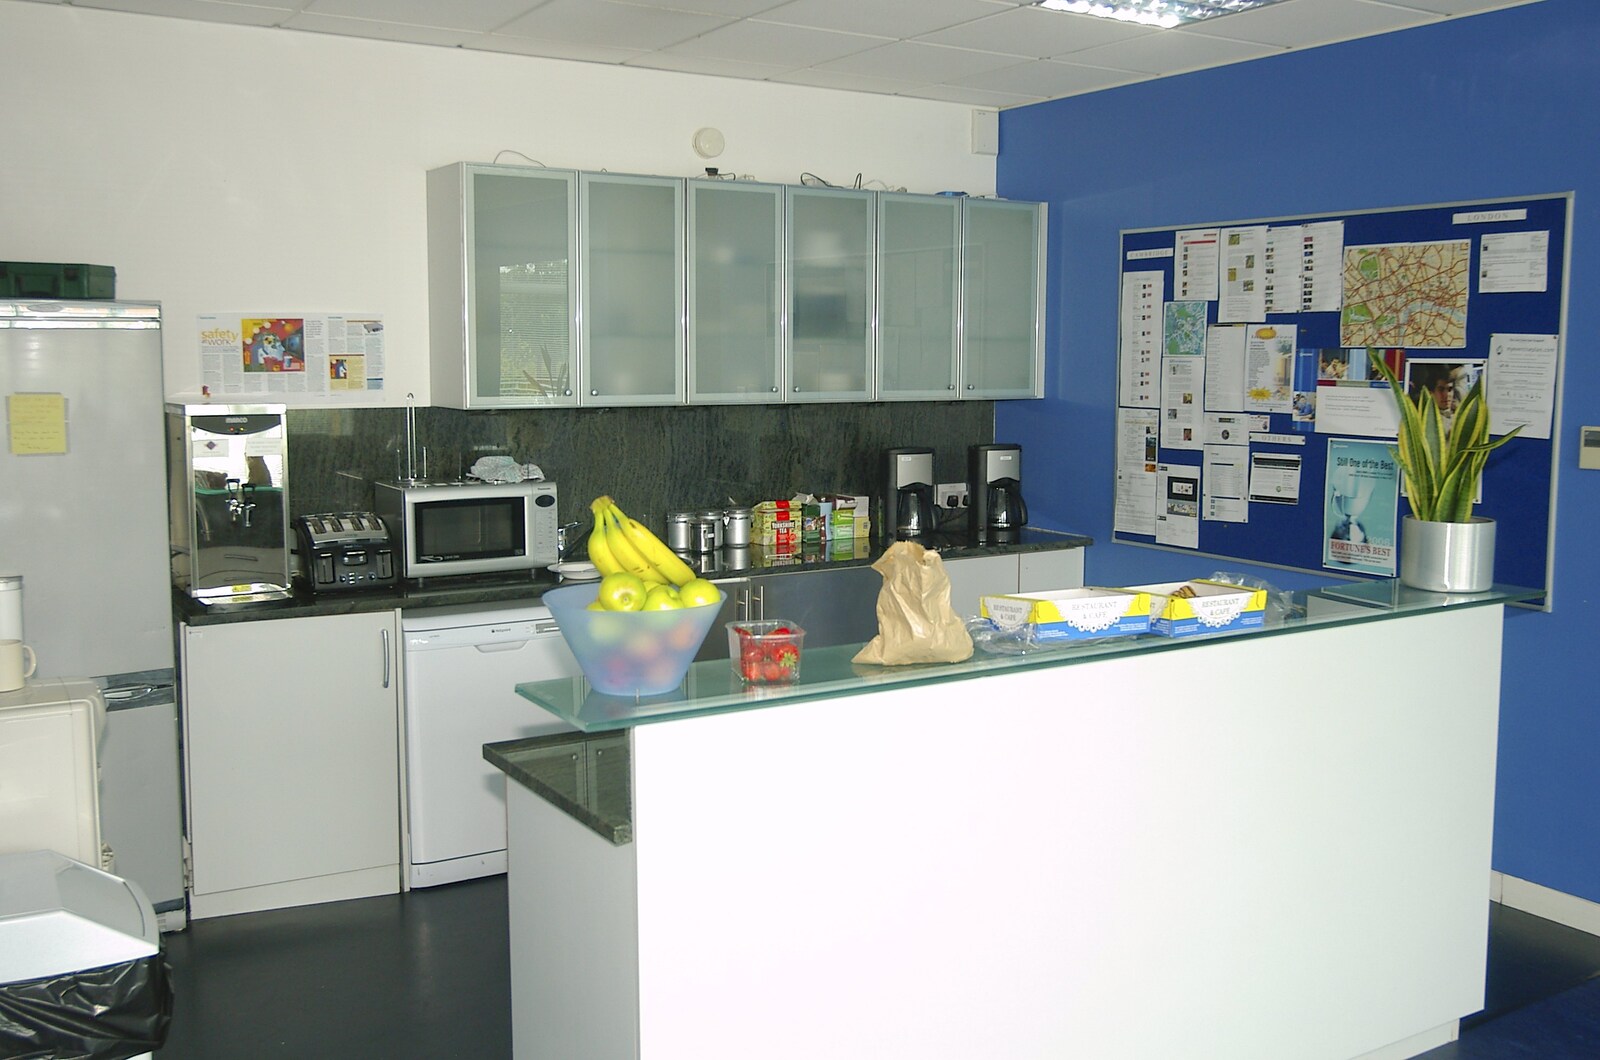 The staff kitchen from Qualcomm Moves Offices, Milton Road, Cambridge - 26th July 2006